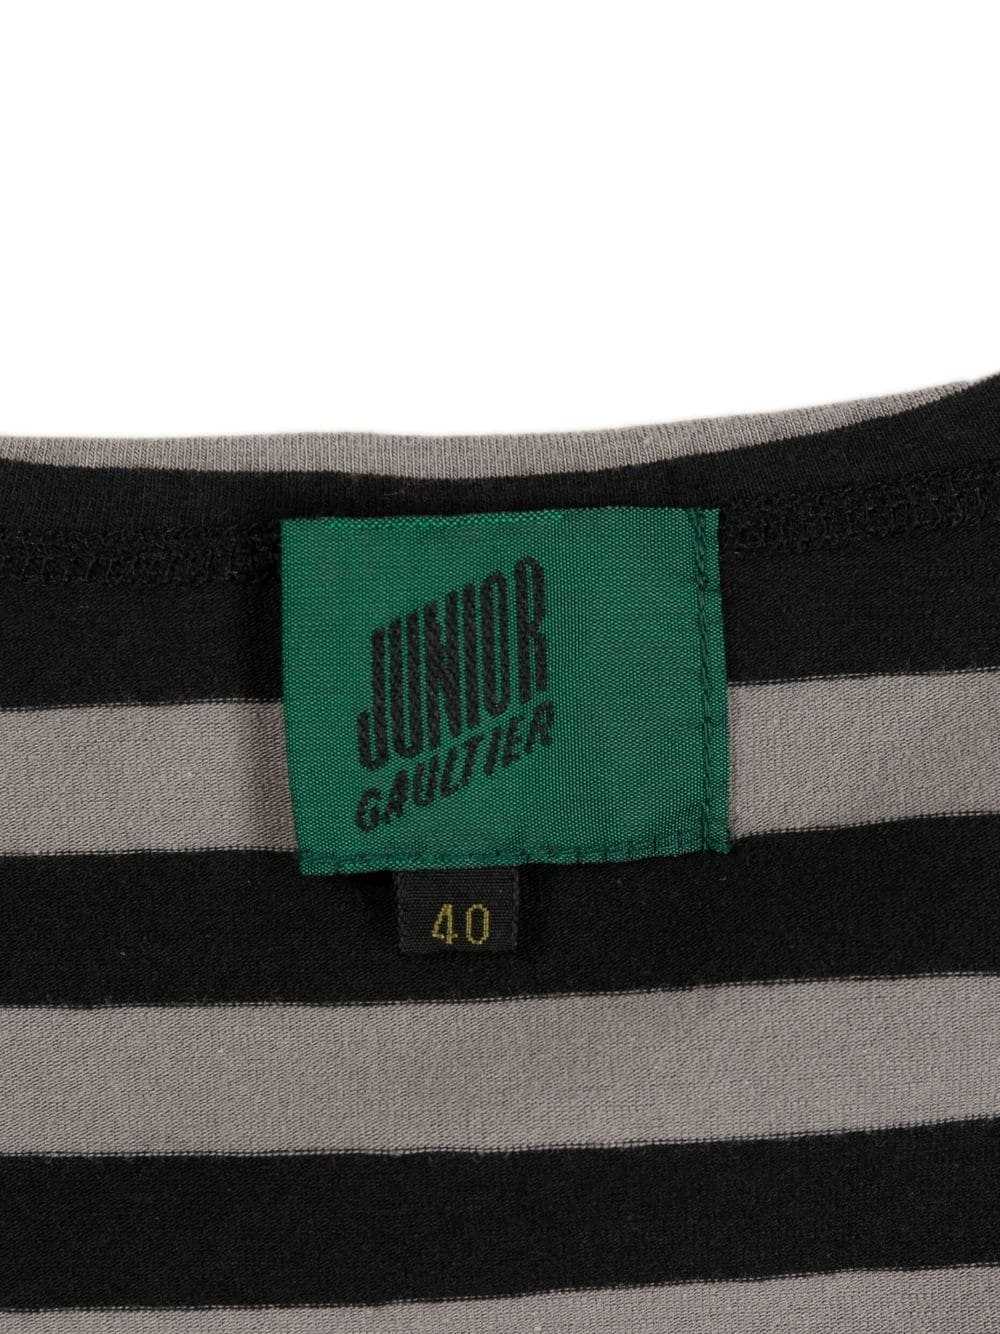 Jean Paul Gaultier Pre-Owned 1980s striped round-… - image 3